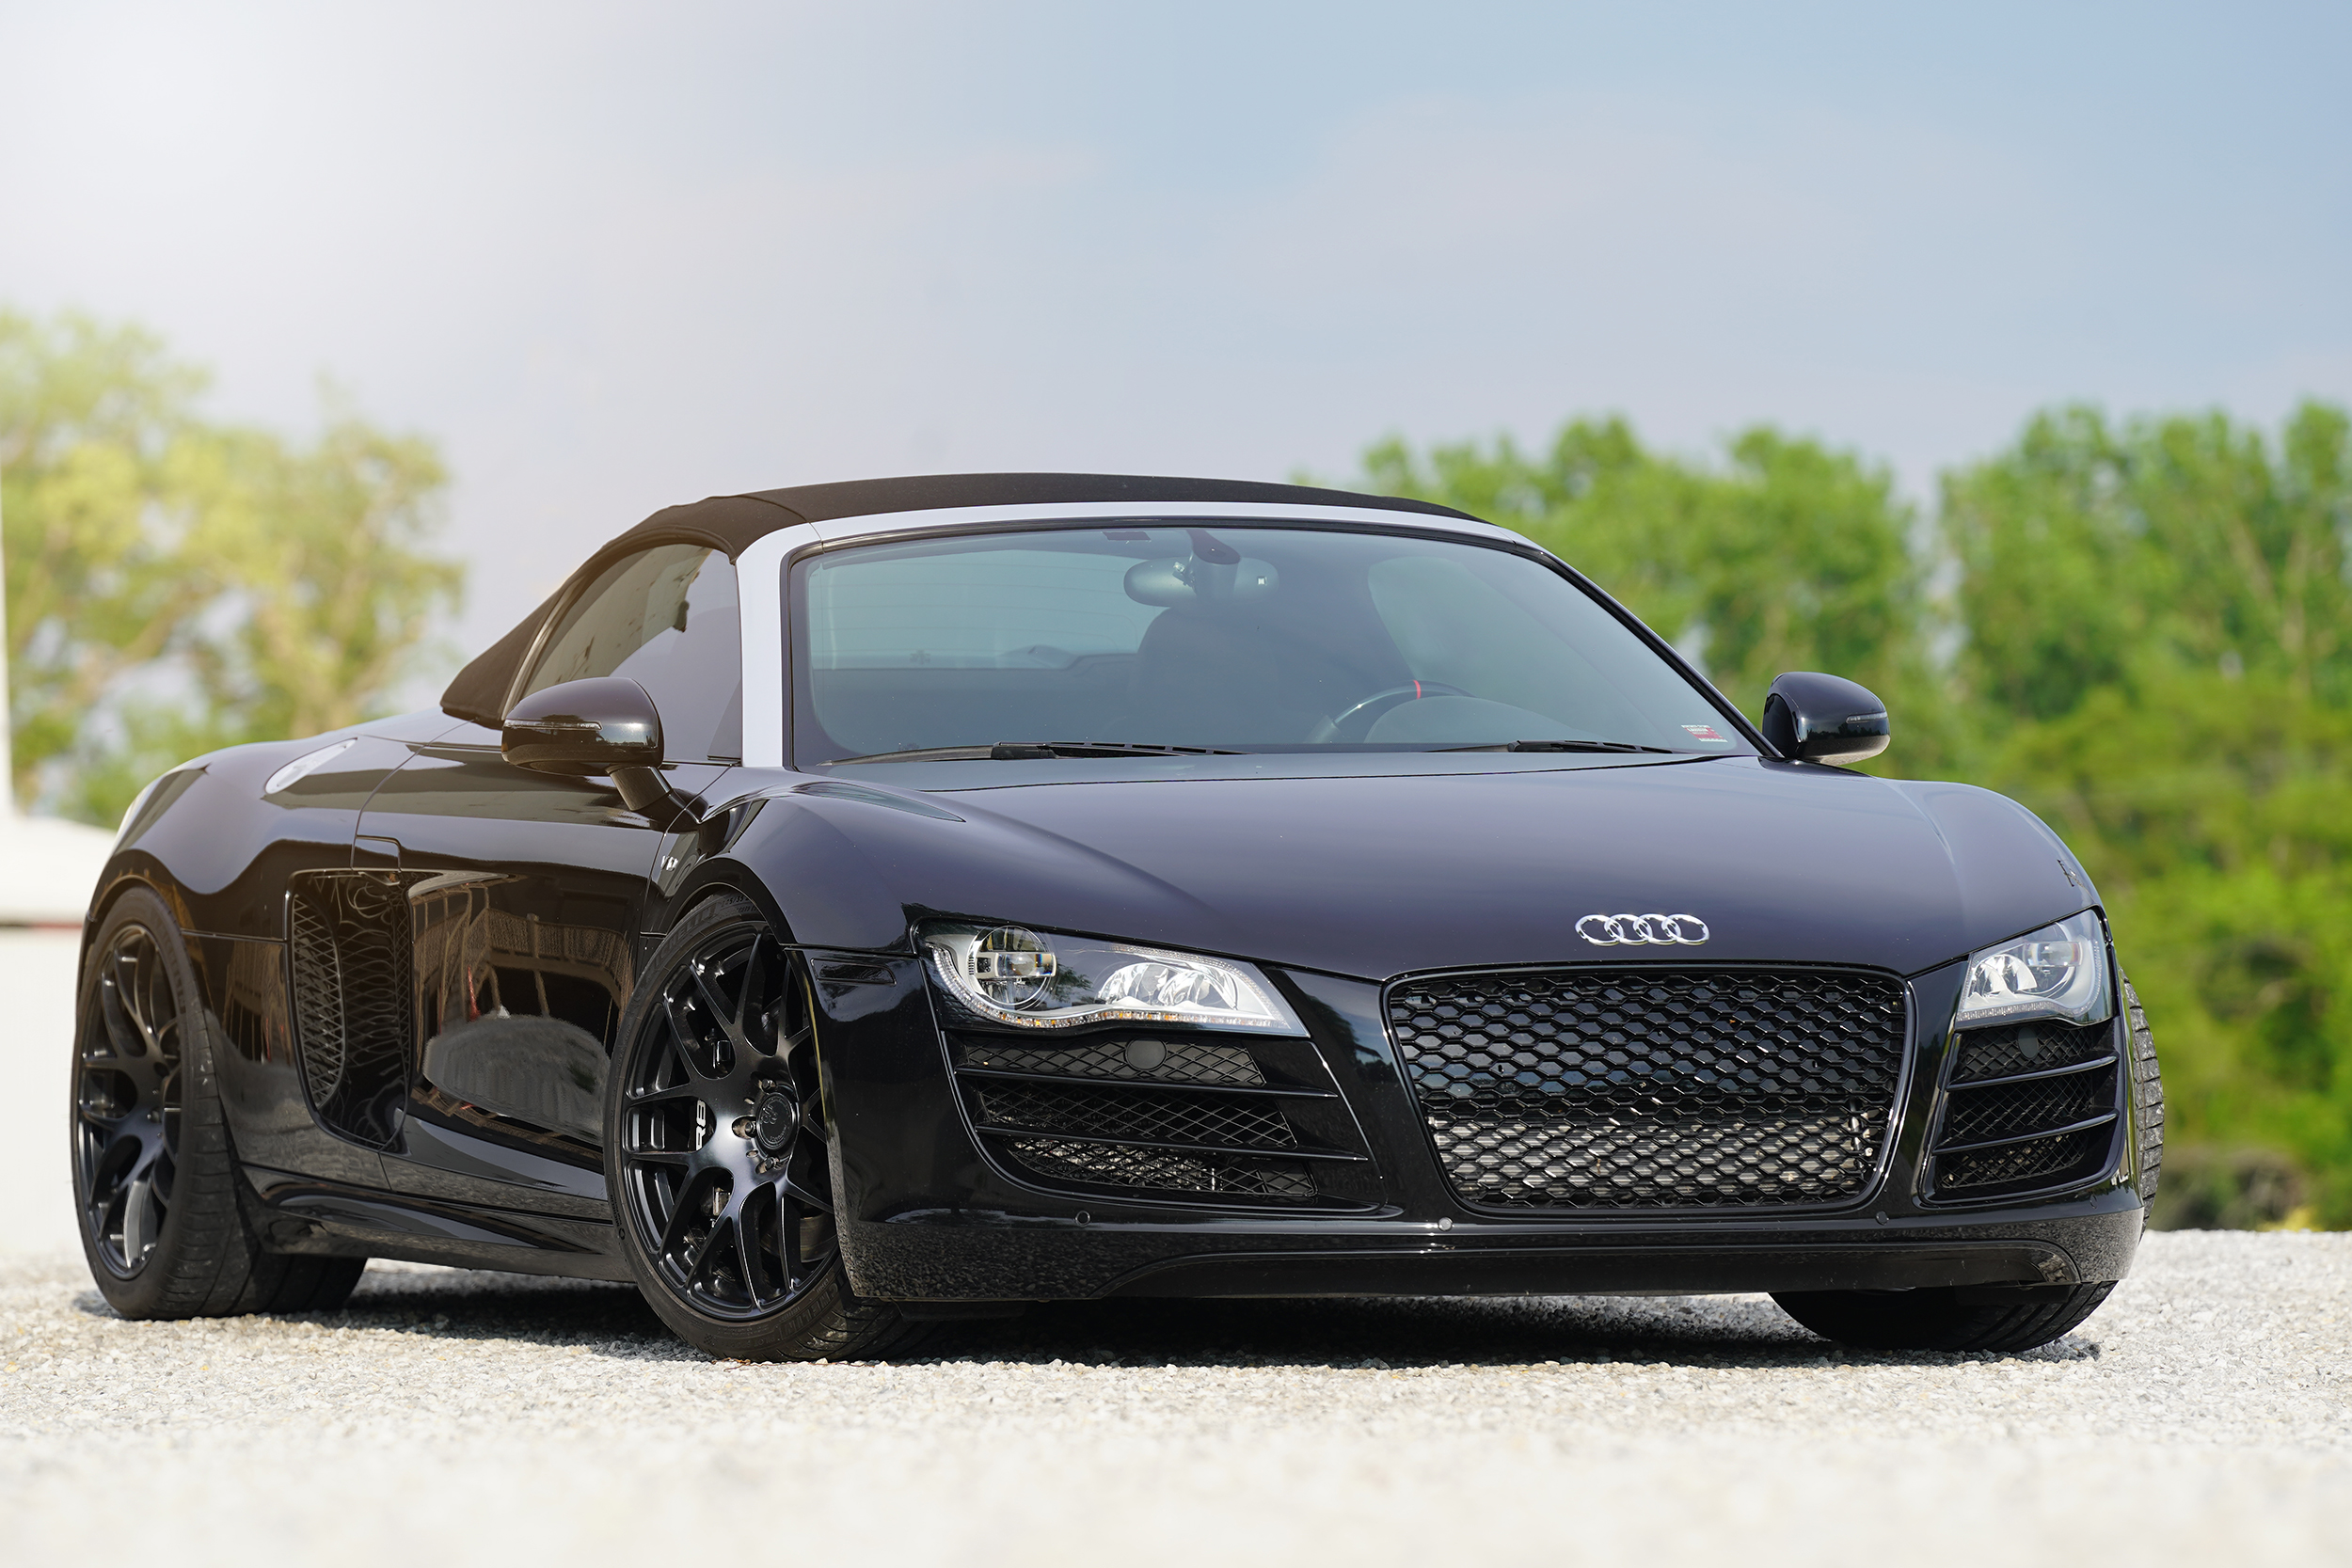 2011 Audi R8 Spyder V10 750hp Supercharged — The Fuel House